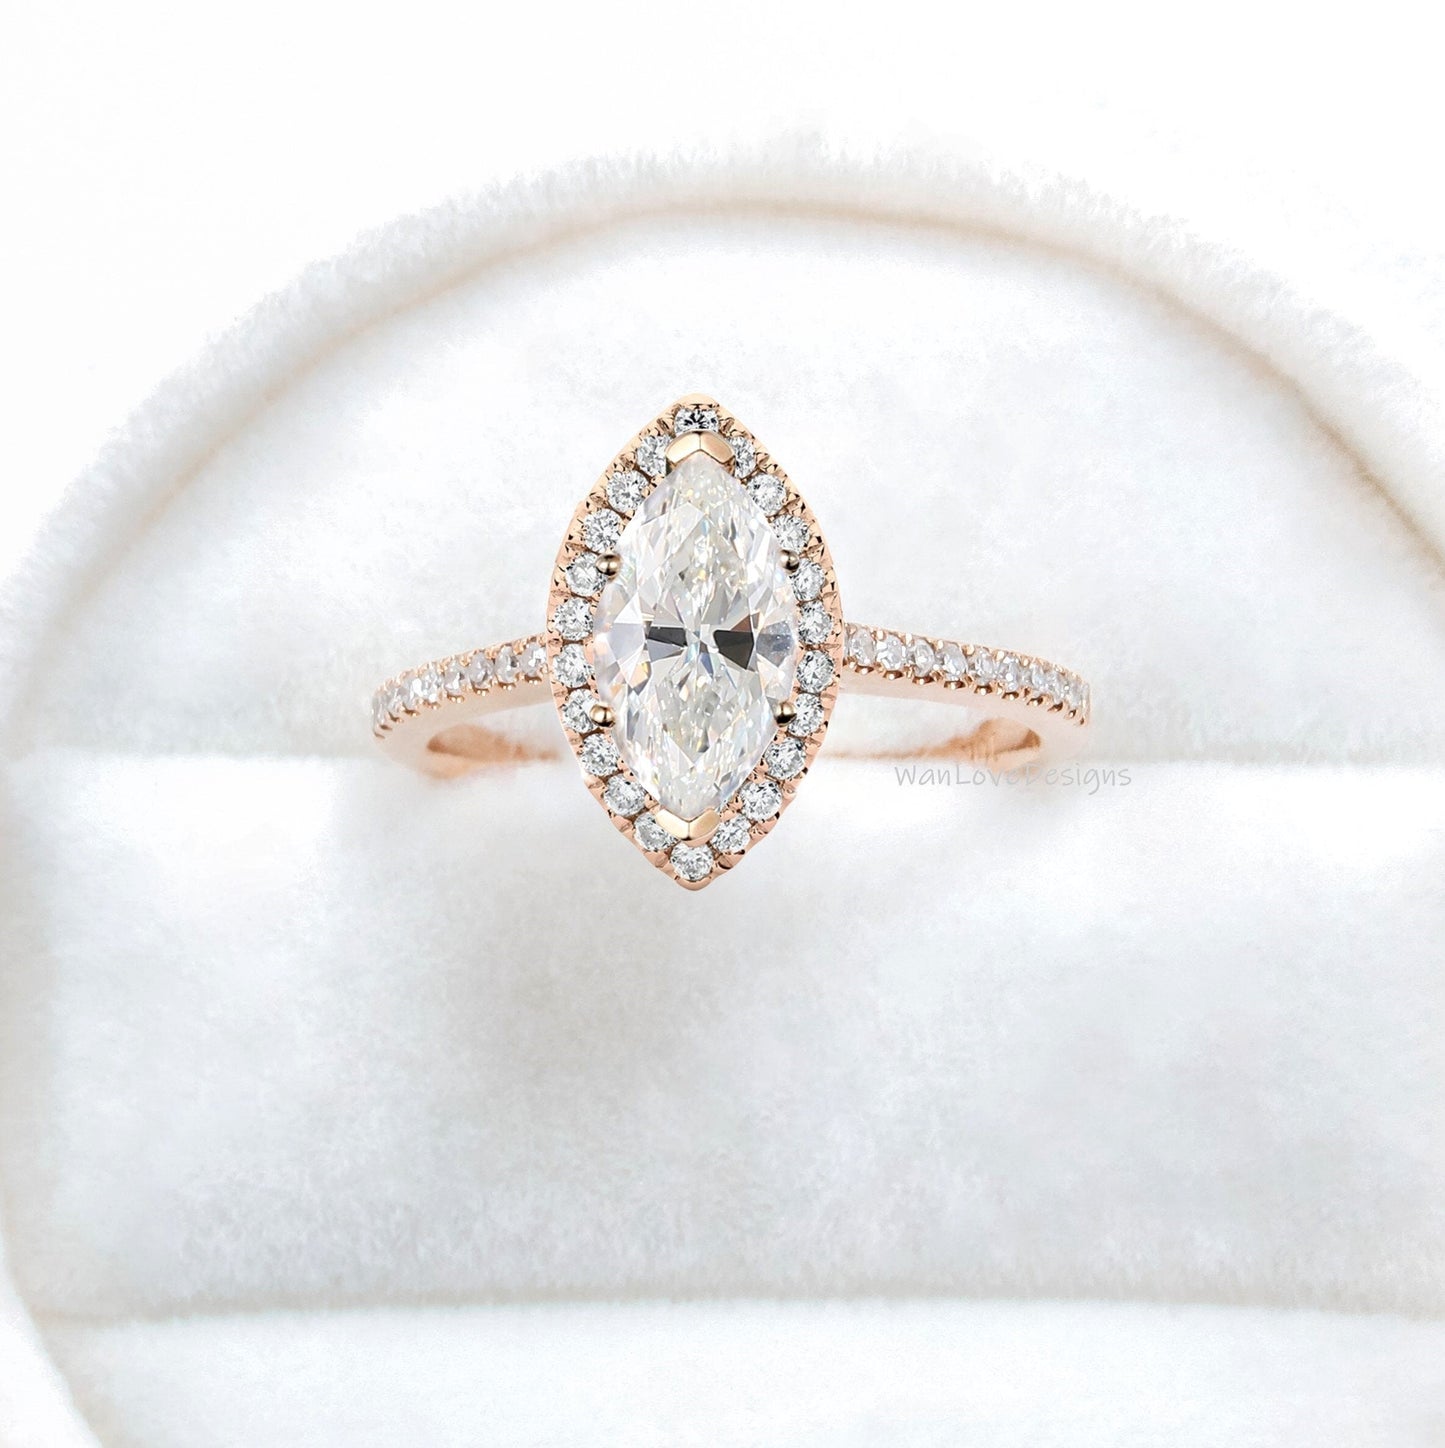 Marquise cut lab diamond engagement ring halo ring vintage certified diamond ring rose gold ring art deco ring promise ring anniversary gift Wan Love Designs